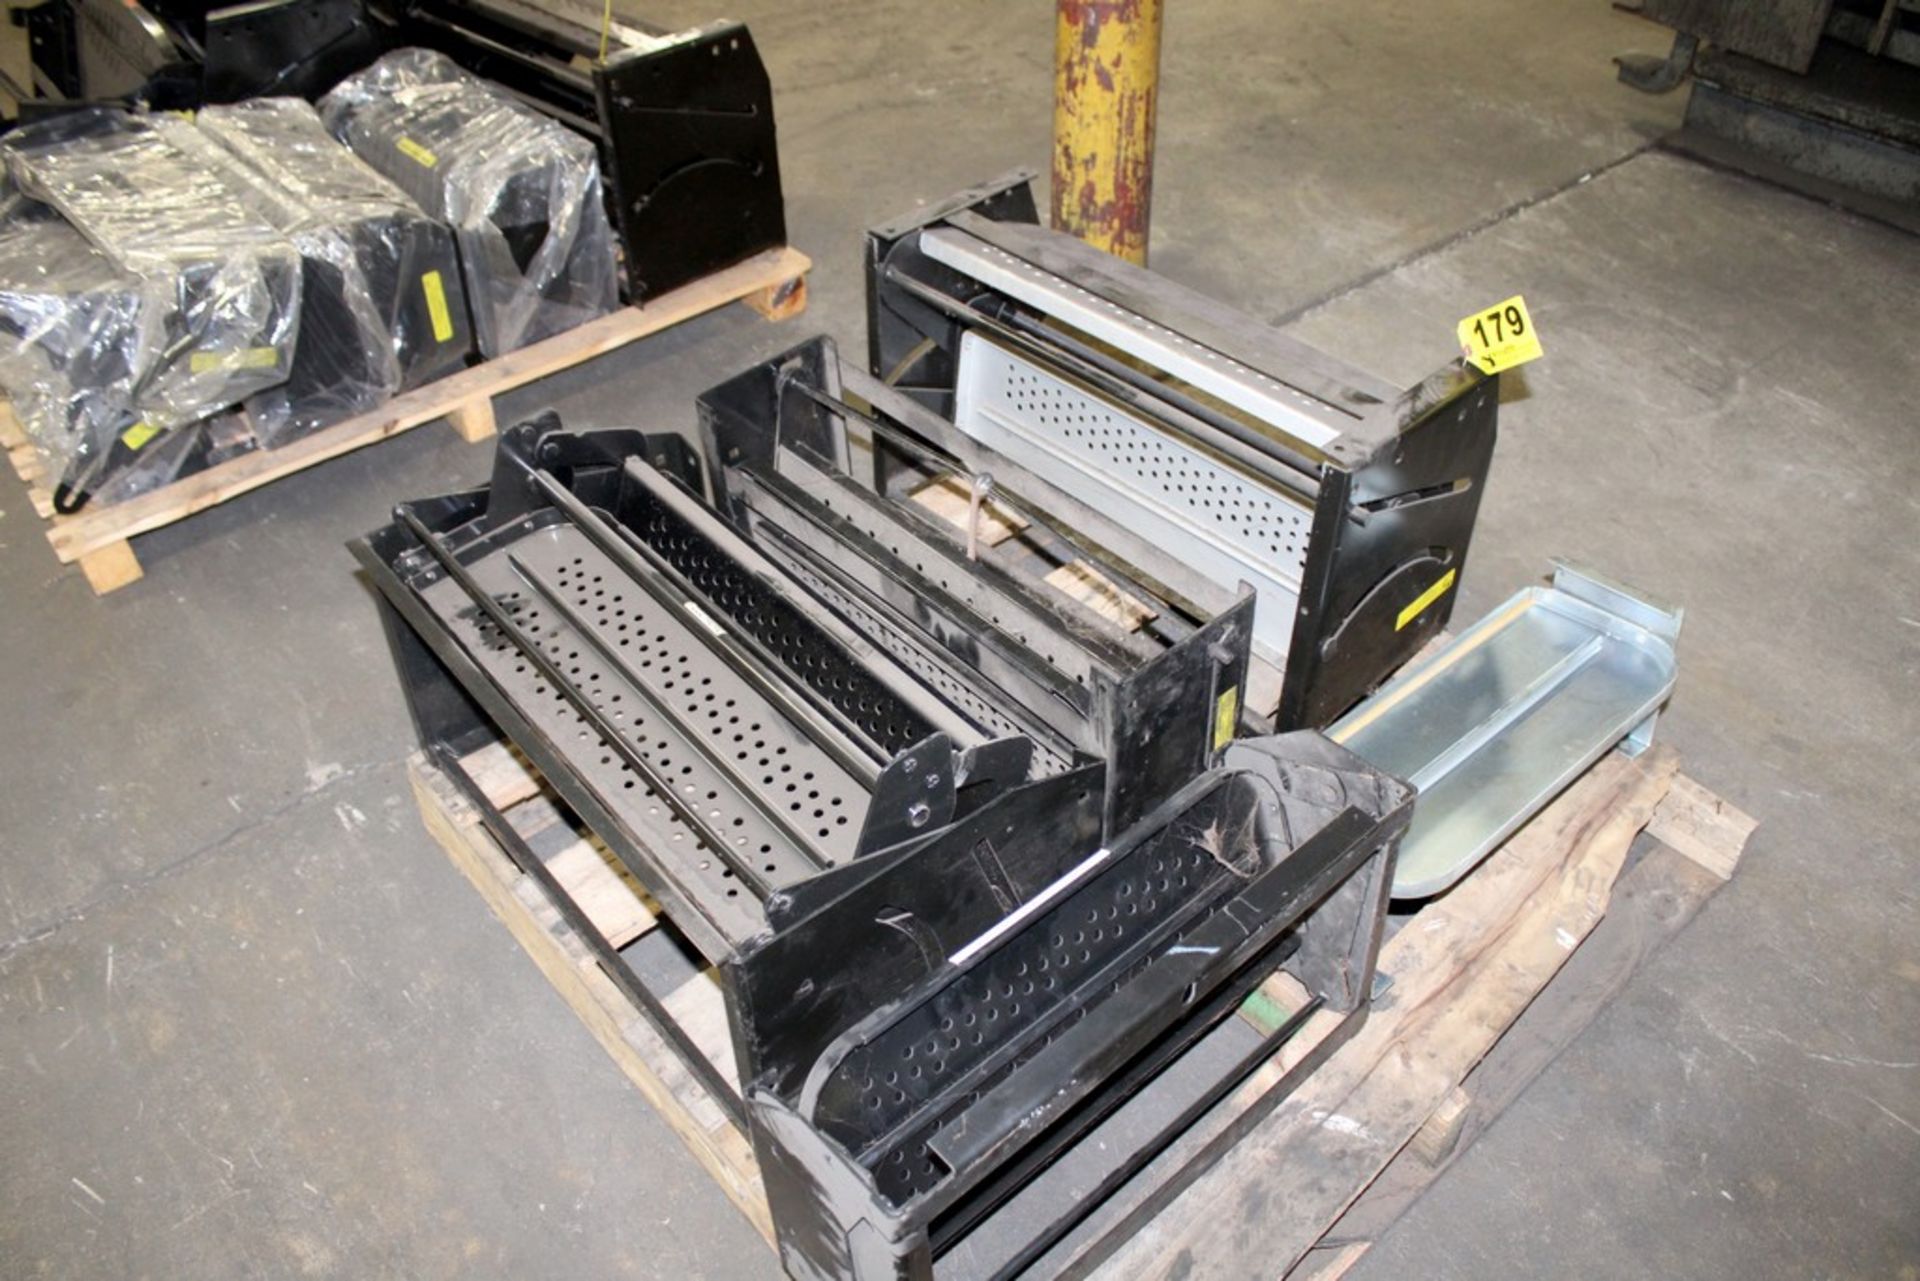 Fold Out RV Steps - Steel Treads - New Old Stock